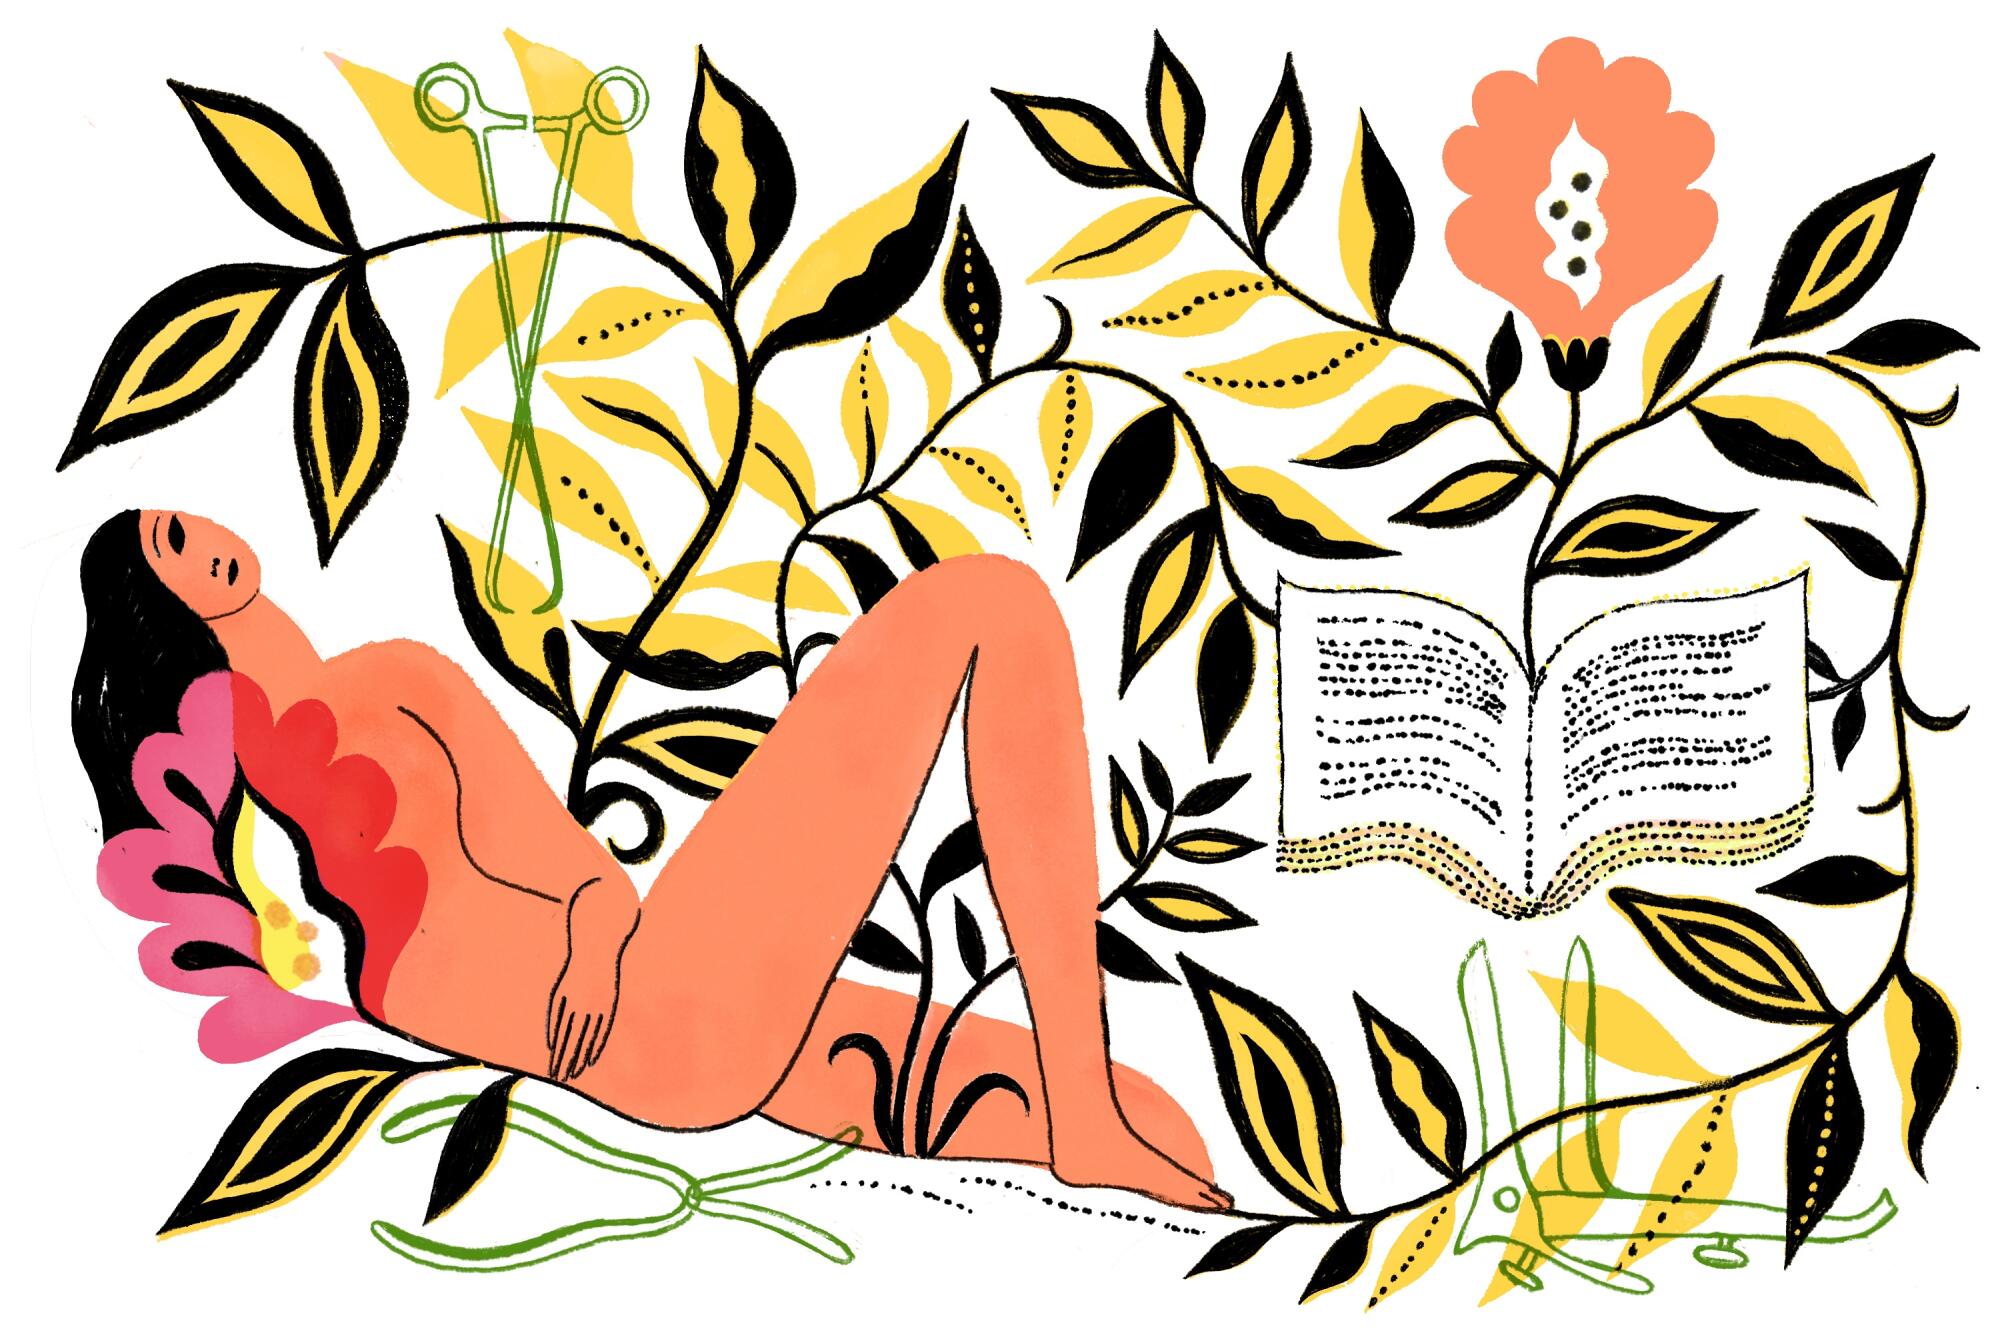 Illustration of a reclining figure surrounded by plants, flowers, a zine and gynecological tools.